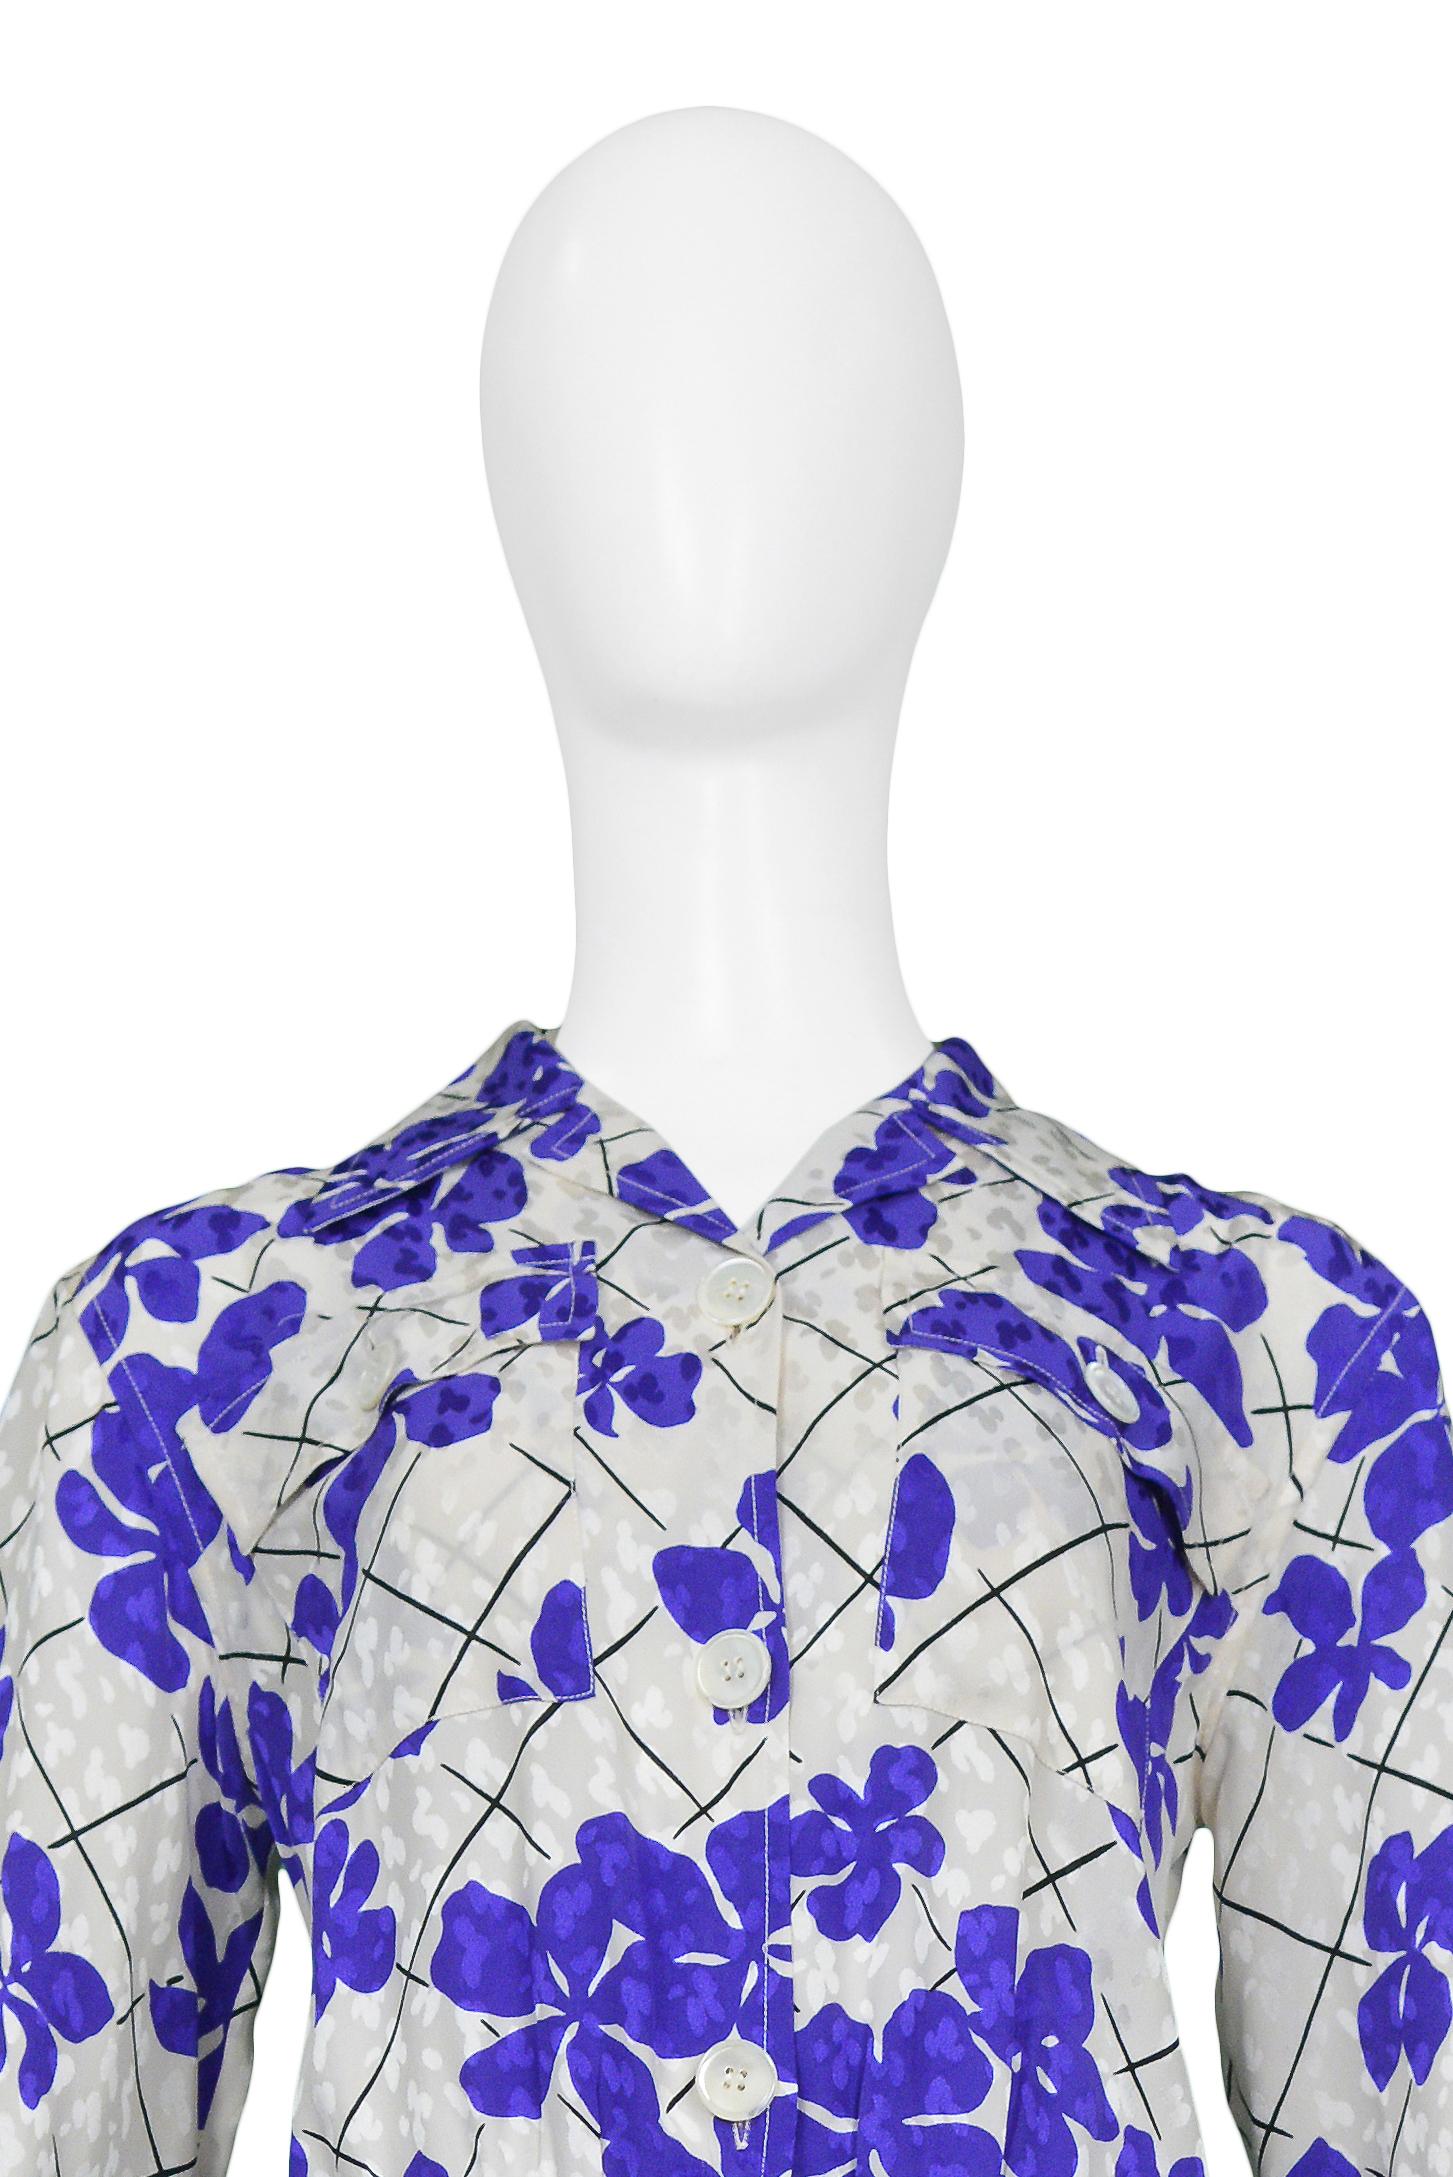 Yves Saint Laurent YSL White & Purple Floral Silk Day Dress For Sale 2